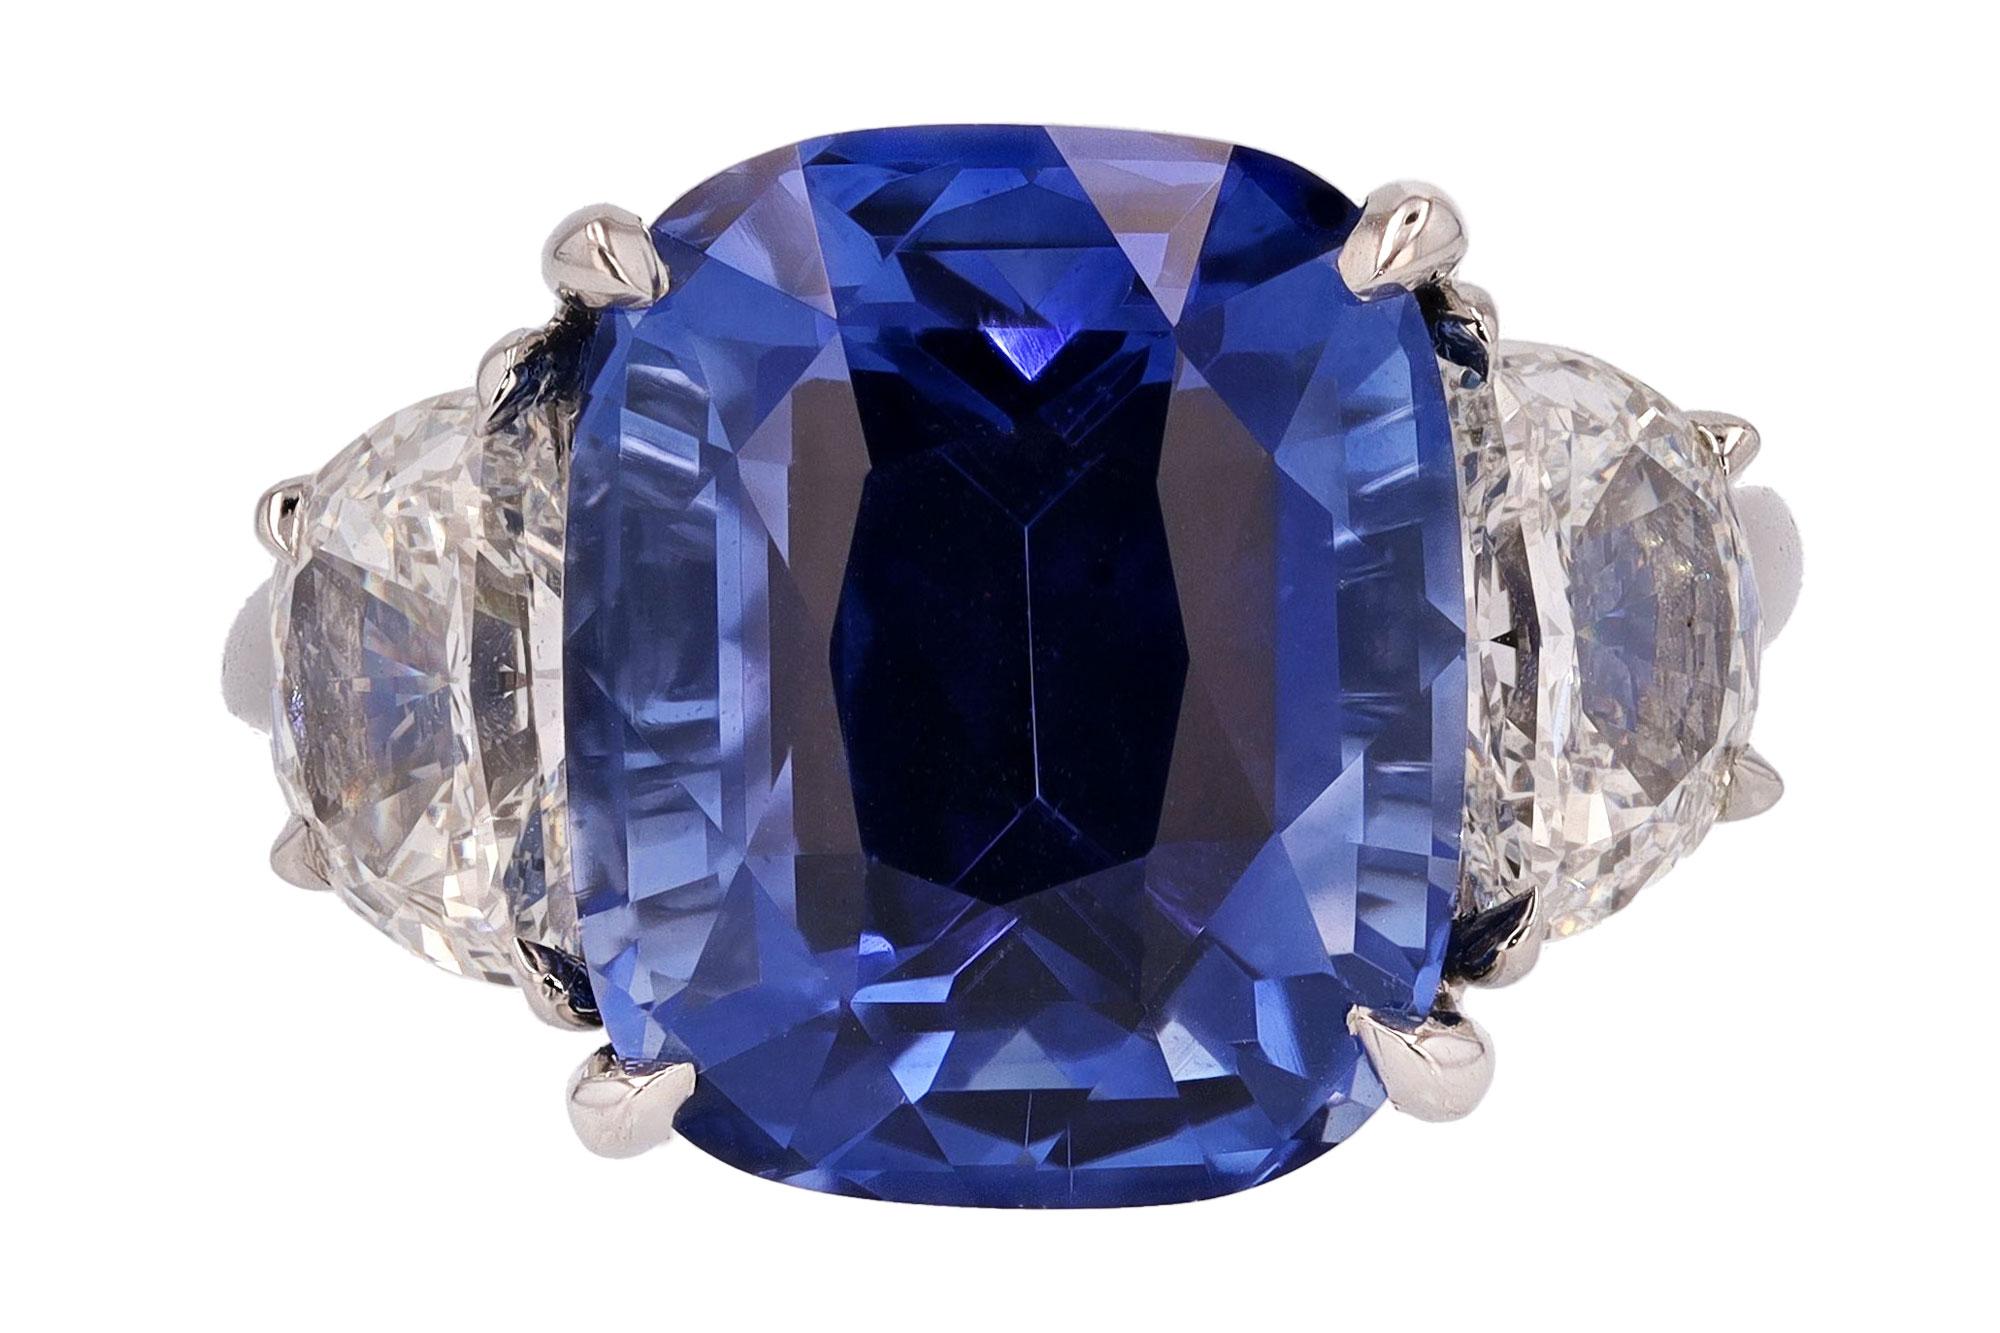 An important 10 carat sapphire engagement ring boasting a most desirable, open and tranquil crystal blue color. A rare, natural specimen certified by the prestigious Swiss GRS laboratory. The platinum mount flanked by a pair of 1.40 carats of